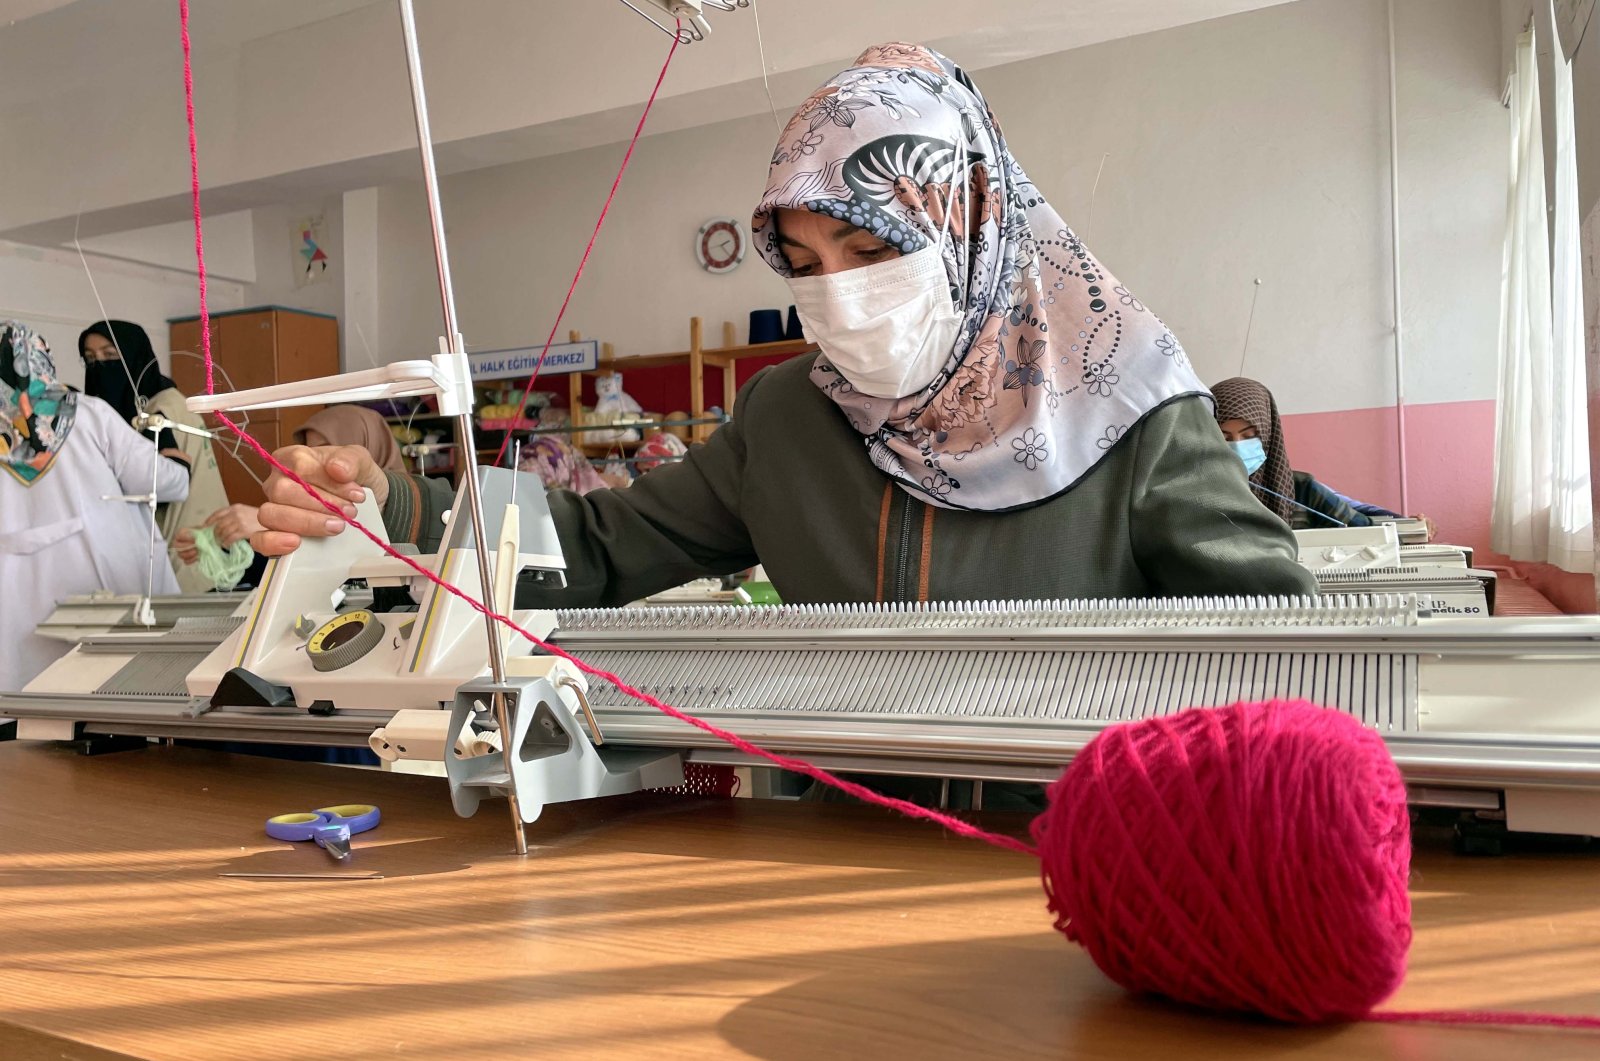 Women knit clothes for children Afghanistan and Syria at the Public Education Center in eastern Elazığ province&#039;s Baskil district, Turkey, Feb. 20, 2022. (AA Photo)